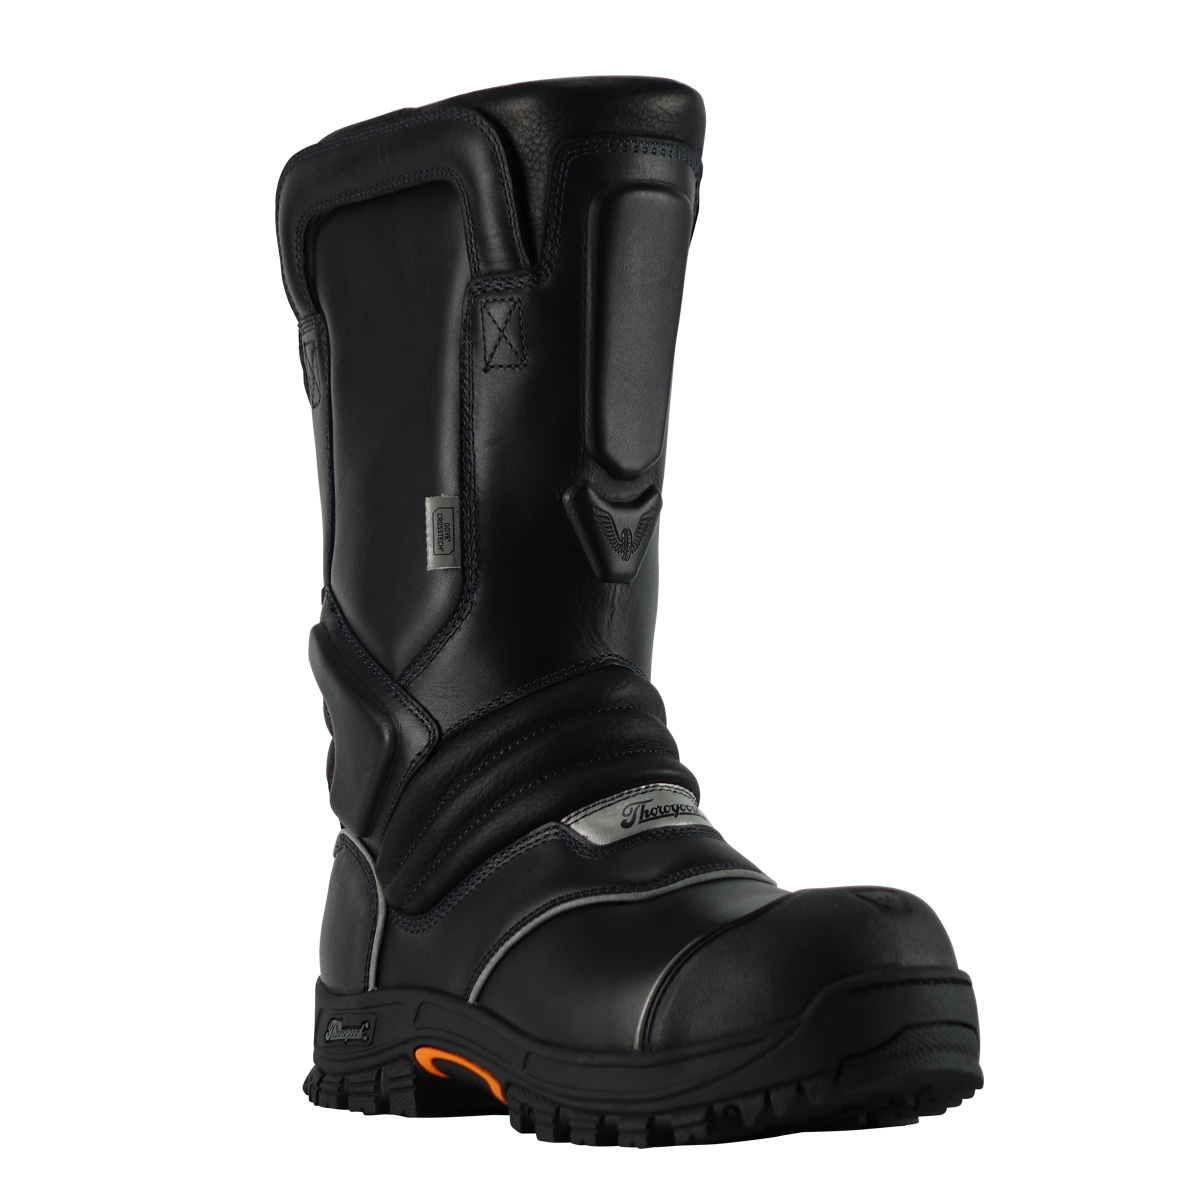 Thorogood Thorogood Men's 14" Bunker Structural Fire Boot